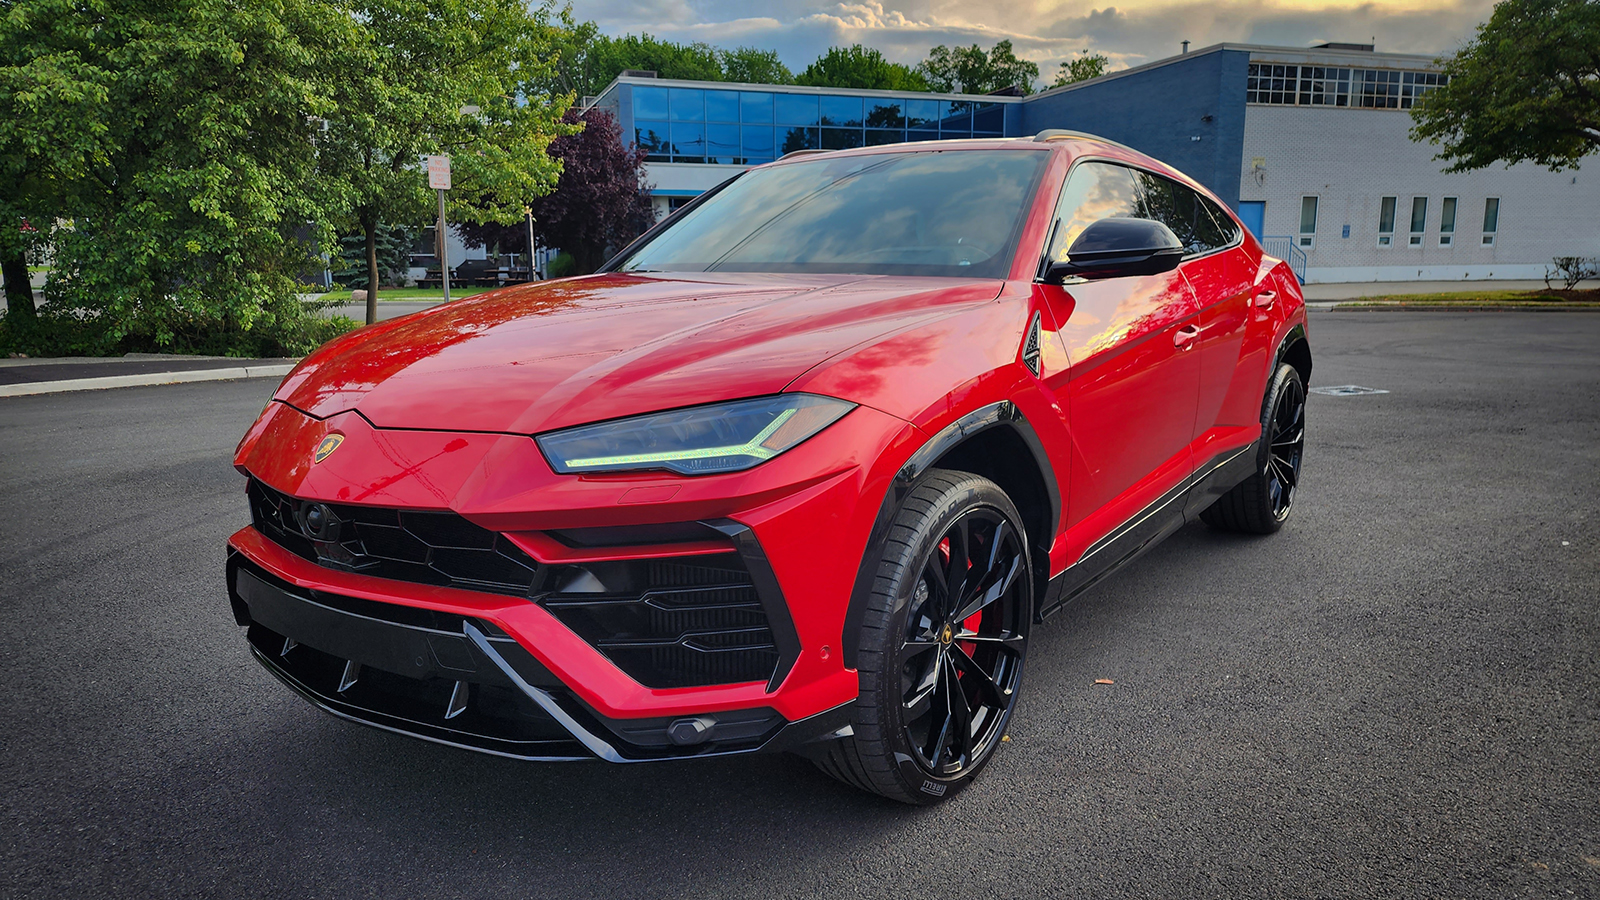 Image of a Lamborghini Urus parked in front of a building